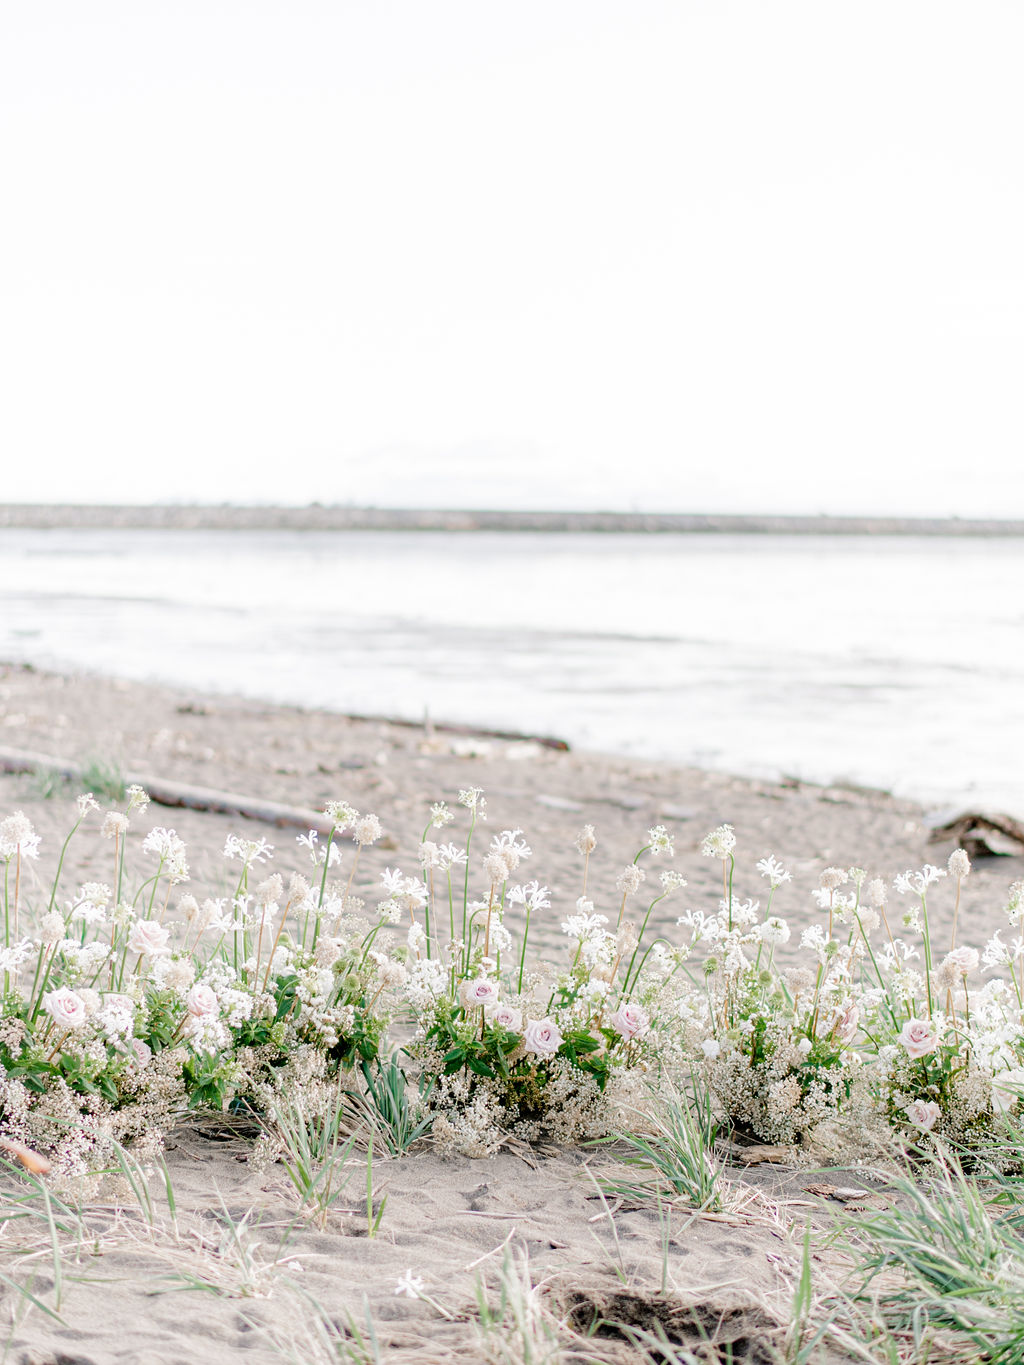 Romantic beach wedding ceremony in Vancouver, British Columbia; Fine art wedding inspiration for an intimate beach wedding, grounded floral arch with organic greenery and blush and sand coloured florals in front of the ocean